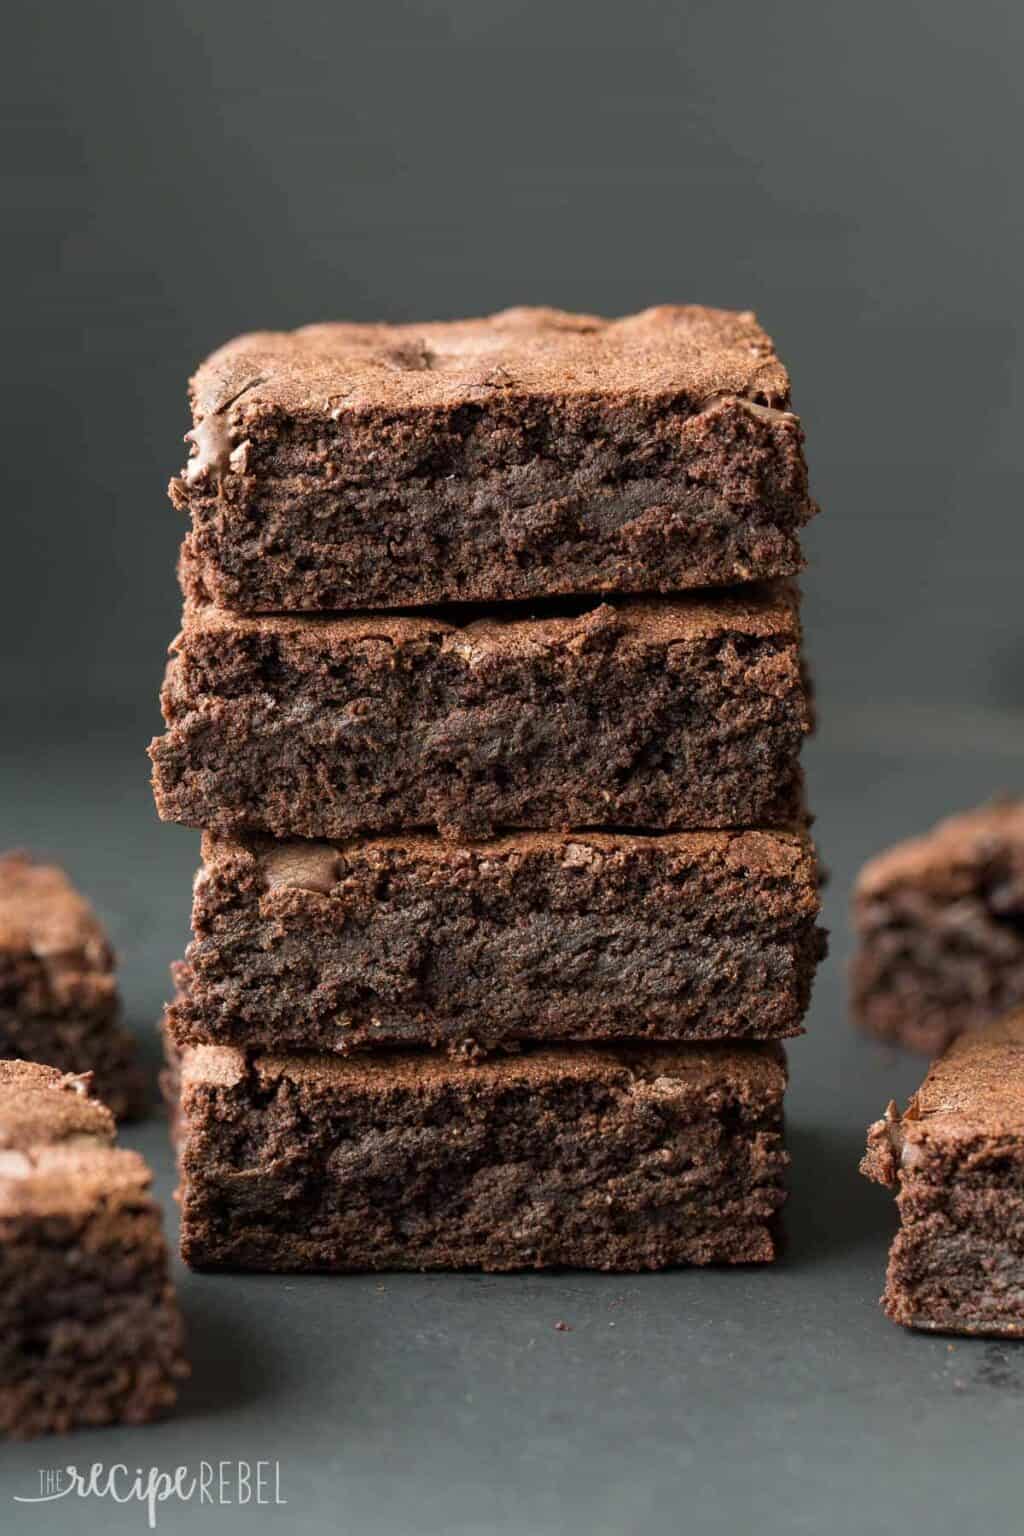 The Best Homemade Brownies (with Video!) | The Recipe Rebel